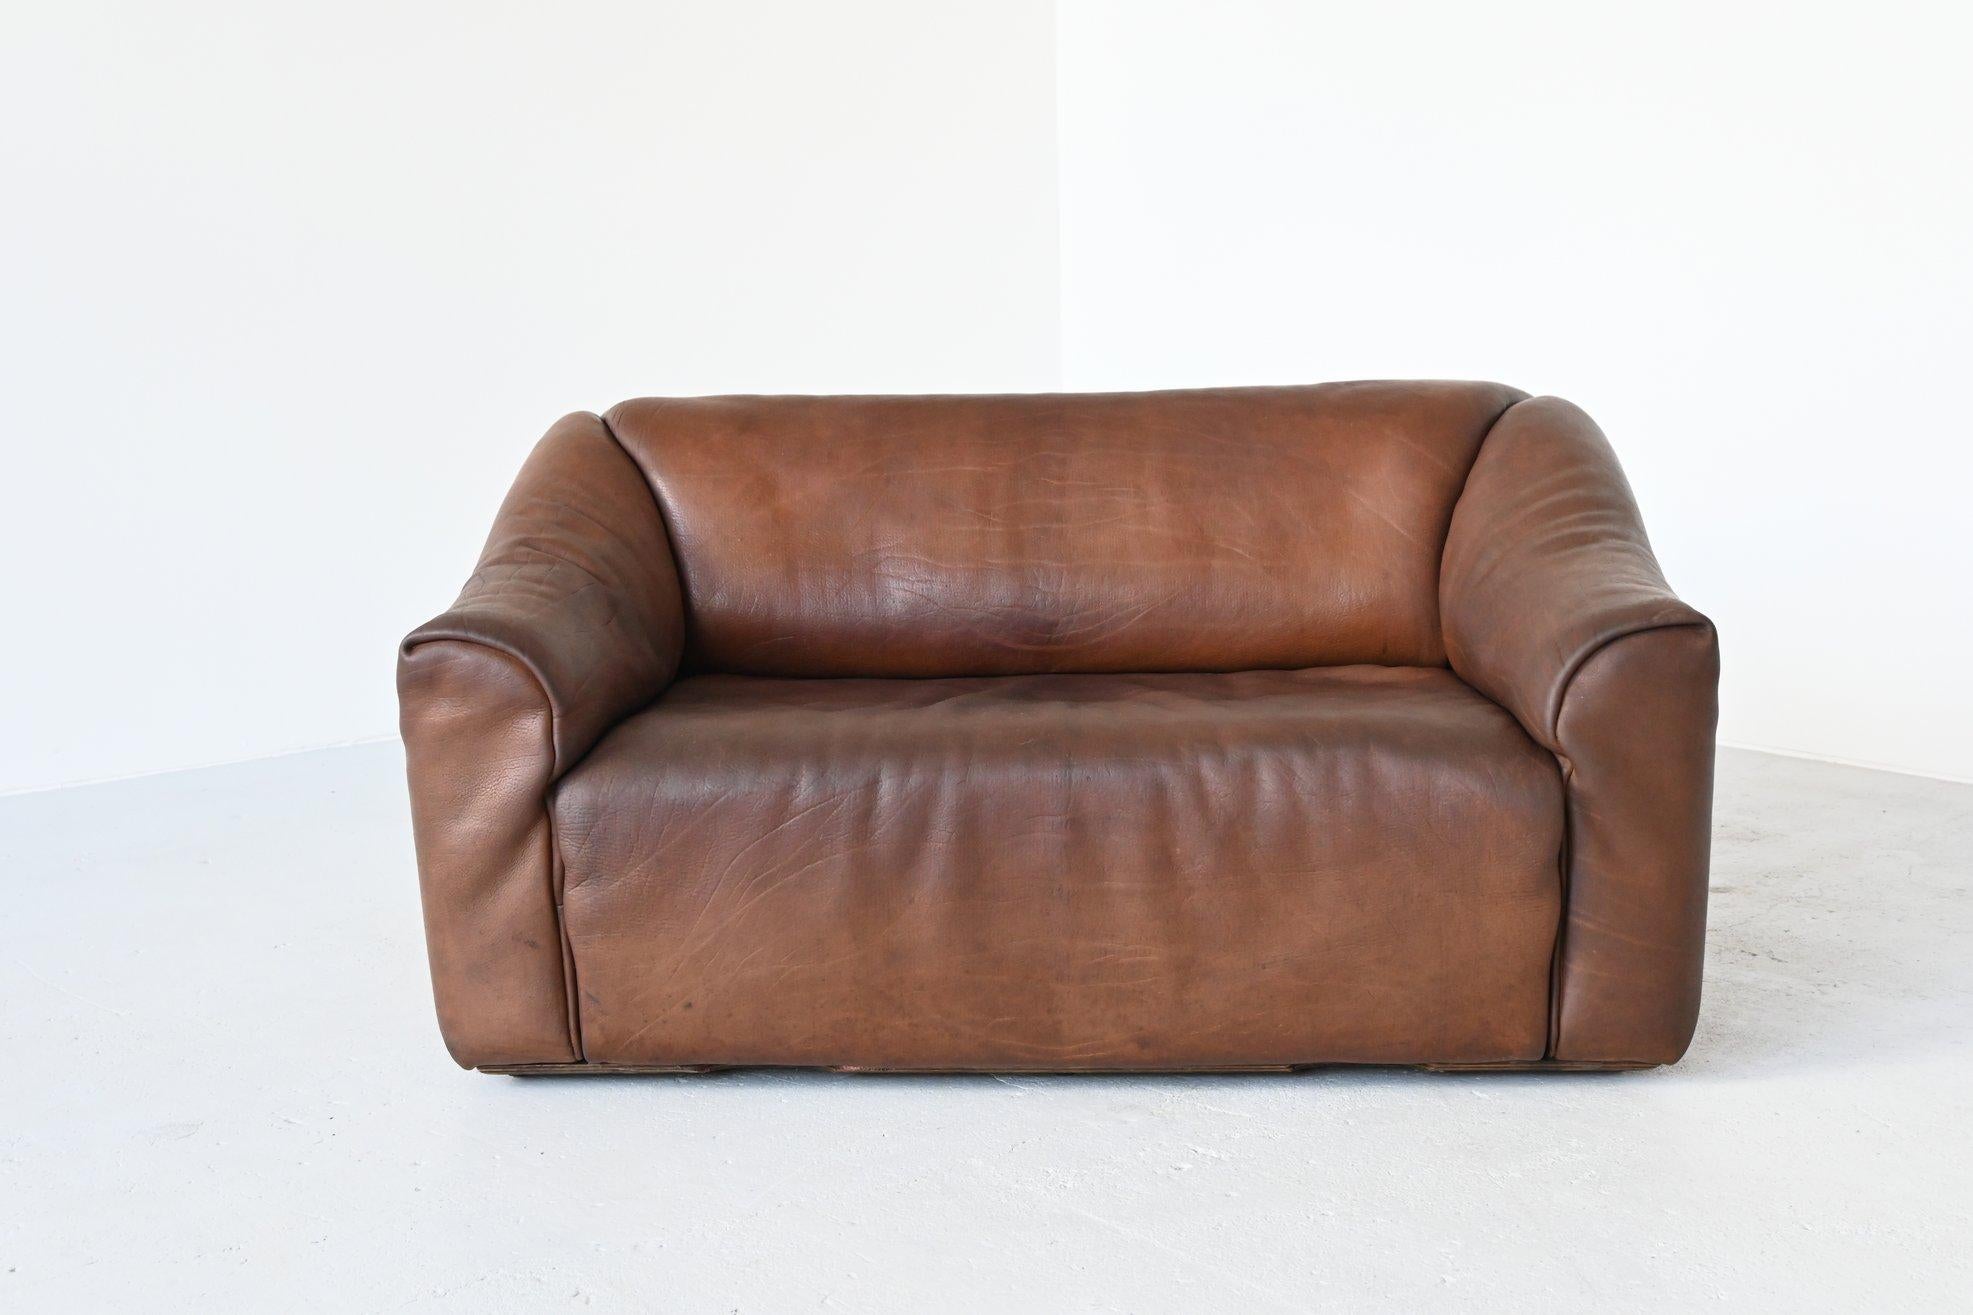 Very comfortable DS47 two-seat sofa designed and manufactured by De Sede, Switzerland 1970. The sofa is made of high quality brown buffalo leather. De Sede is known for its supreme quality leather and comfort seating. The sofa has the incredible